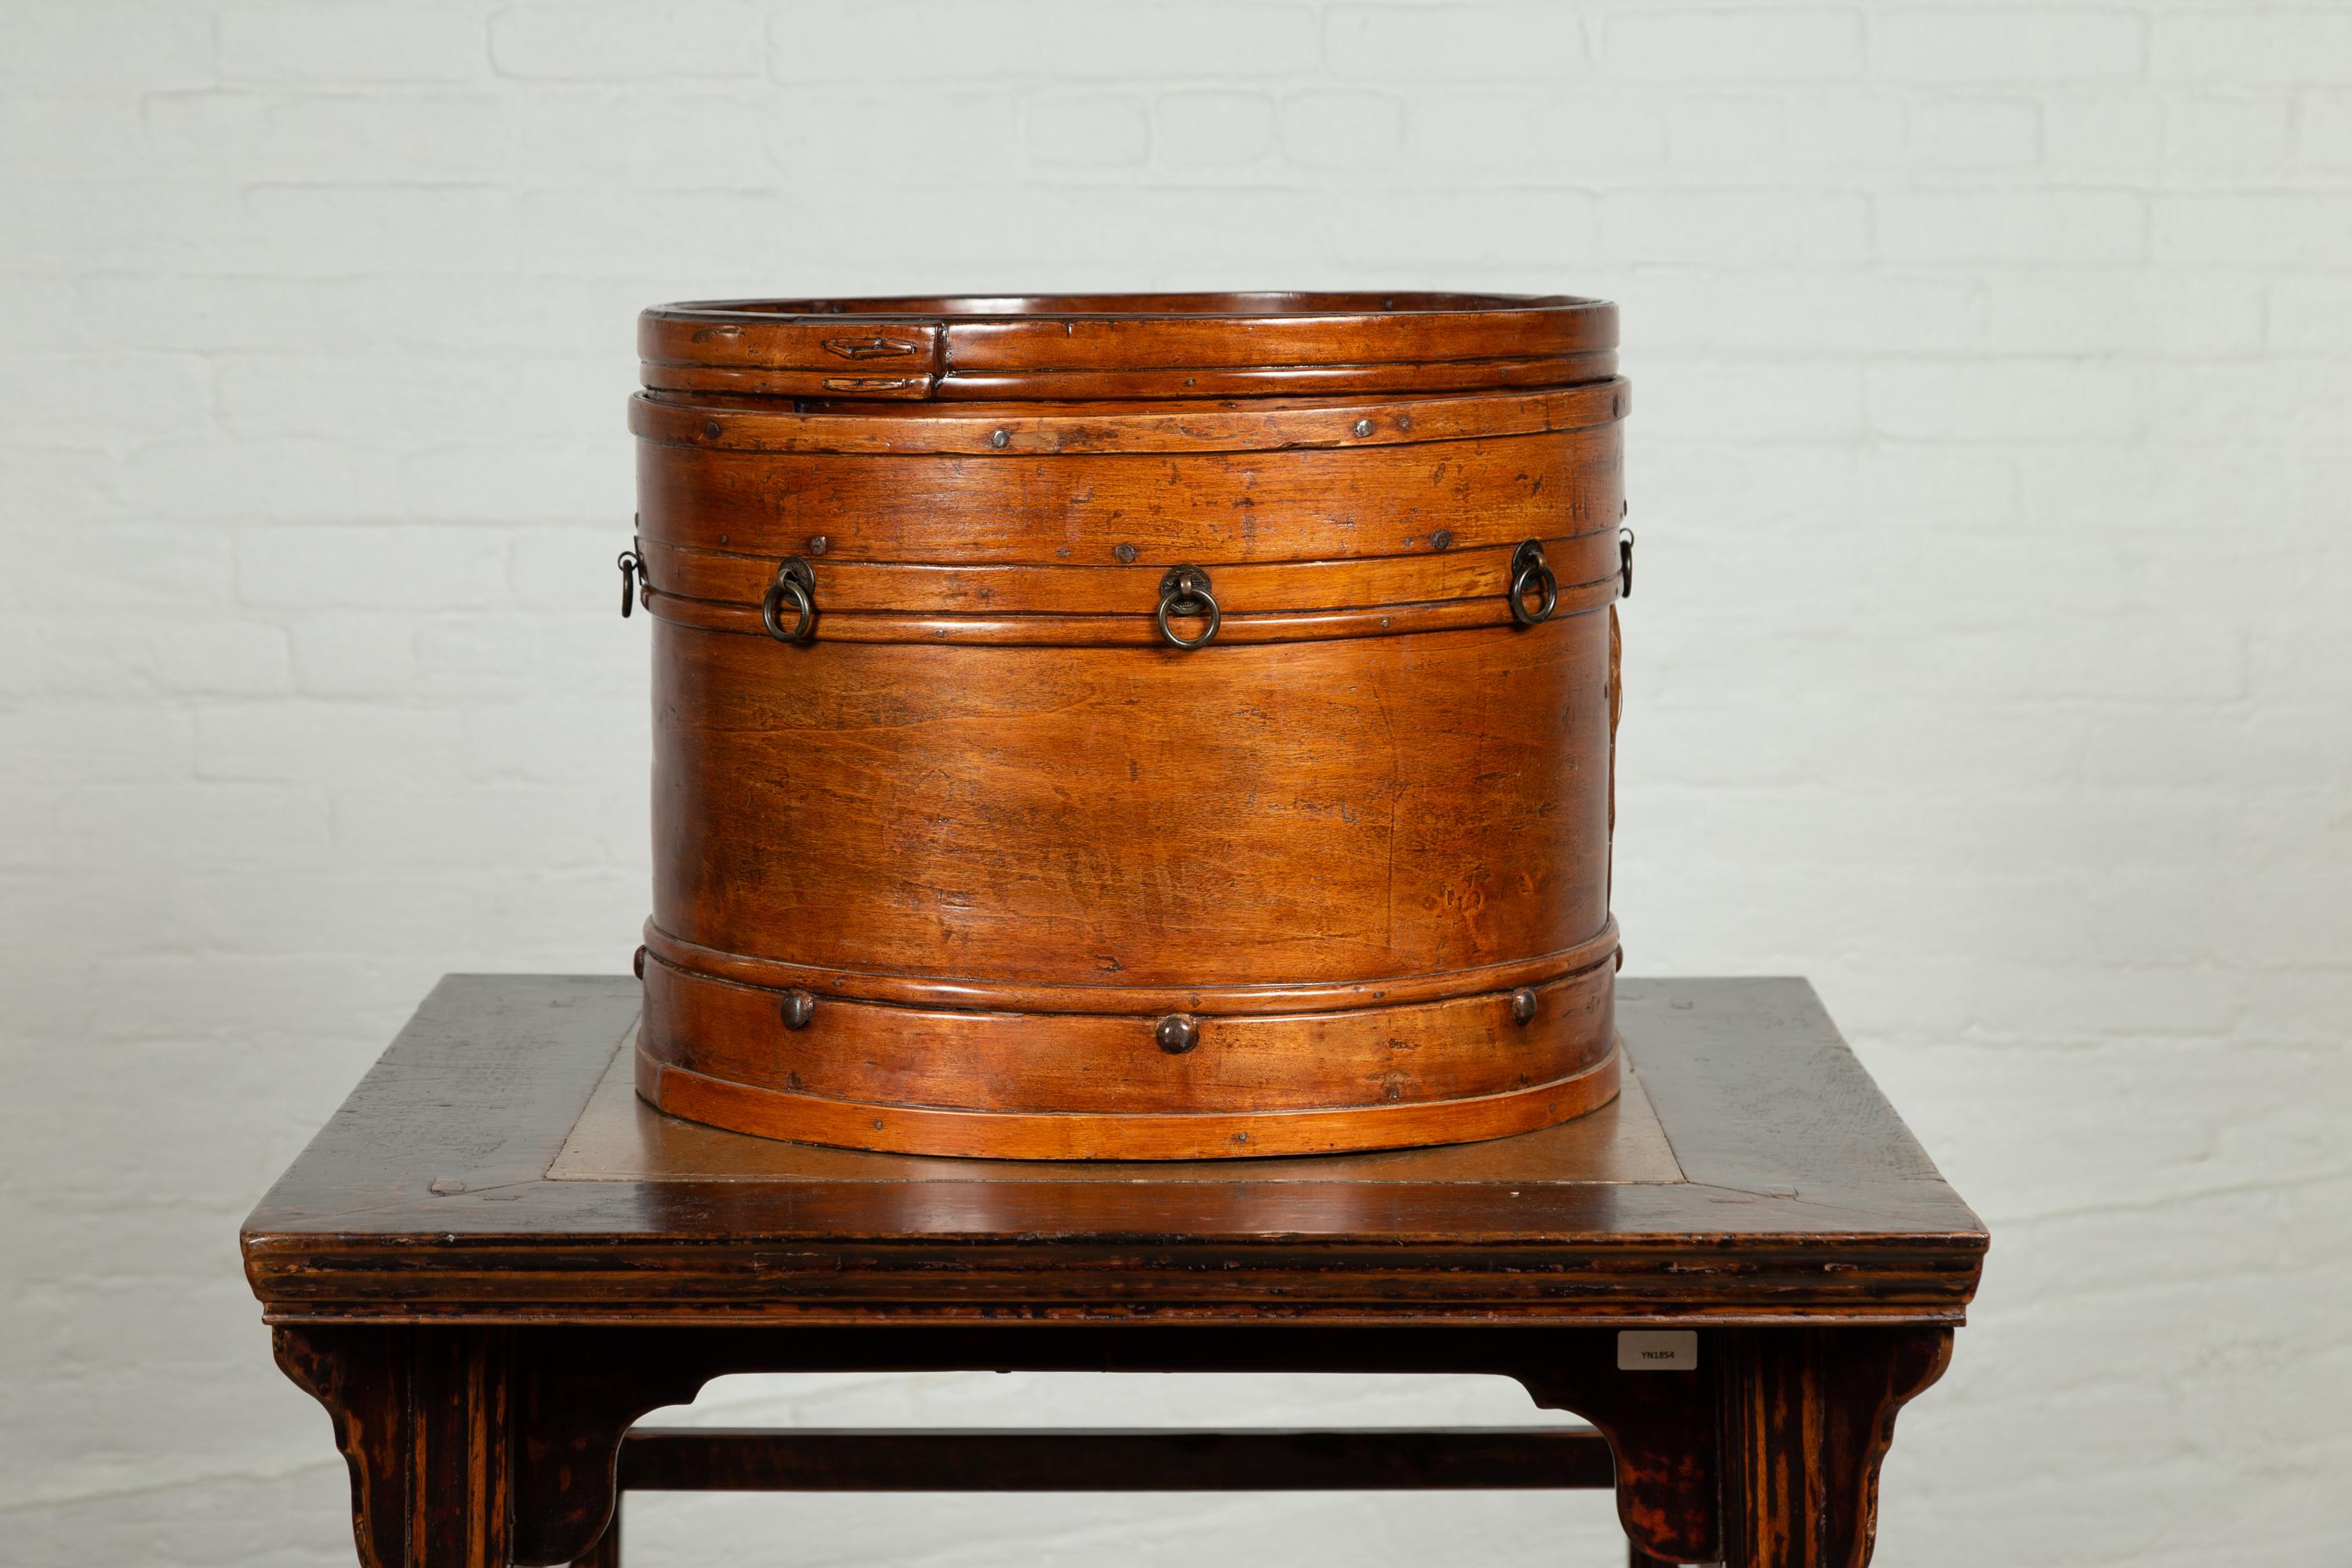 Qing Dynasty 19th Century Round Lidded Wooden Box with Rattan Top For Sale 6